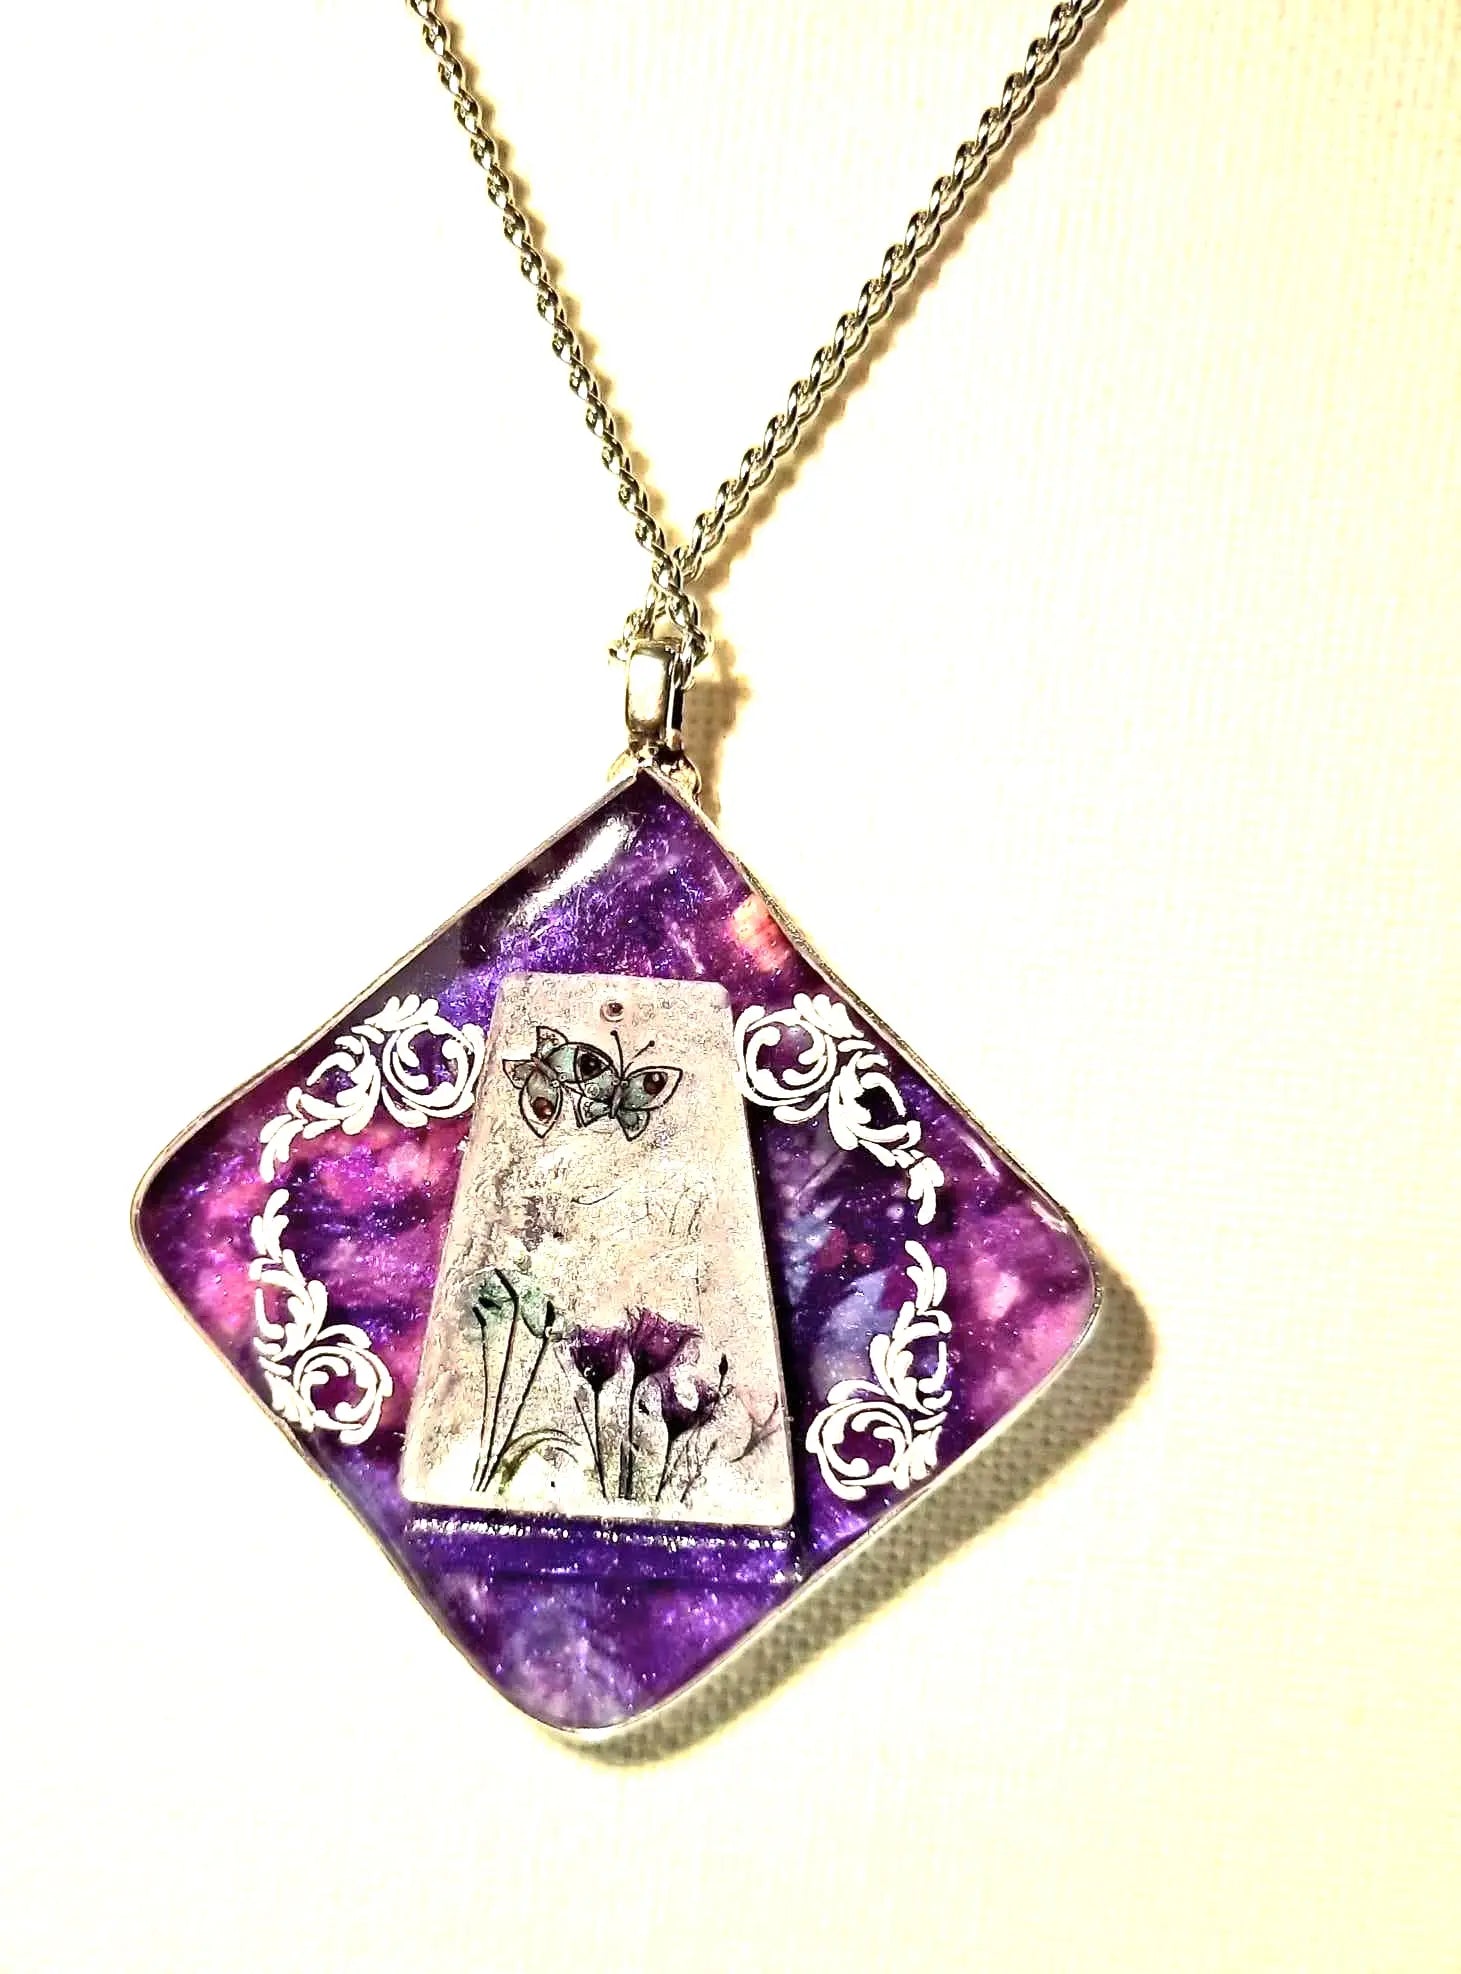 Reversible handcrafted by Josie purple colors pendant necklace - Image #3